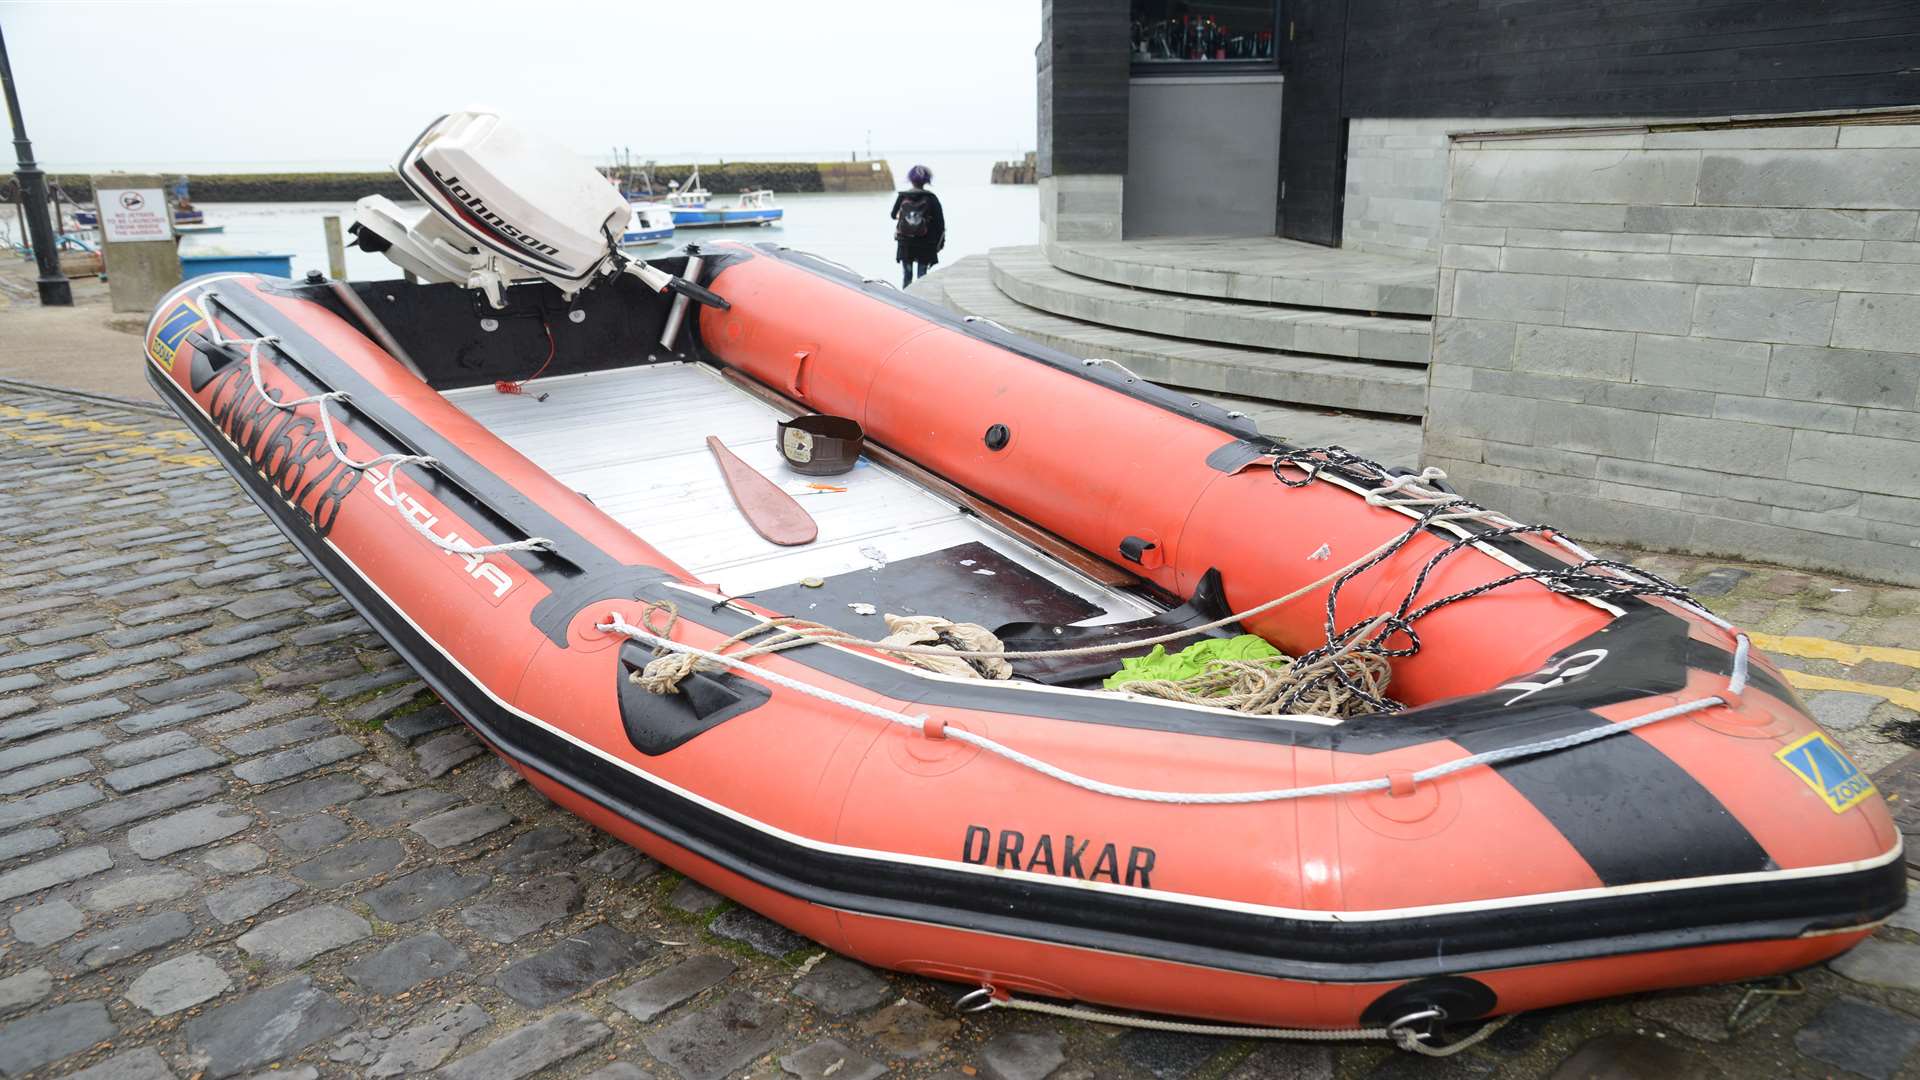 A migrants' dinghy recovered at Folkestone Harbour; Could returning ISIL terrorists try the same?